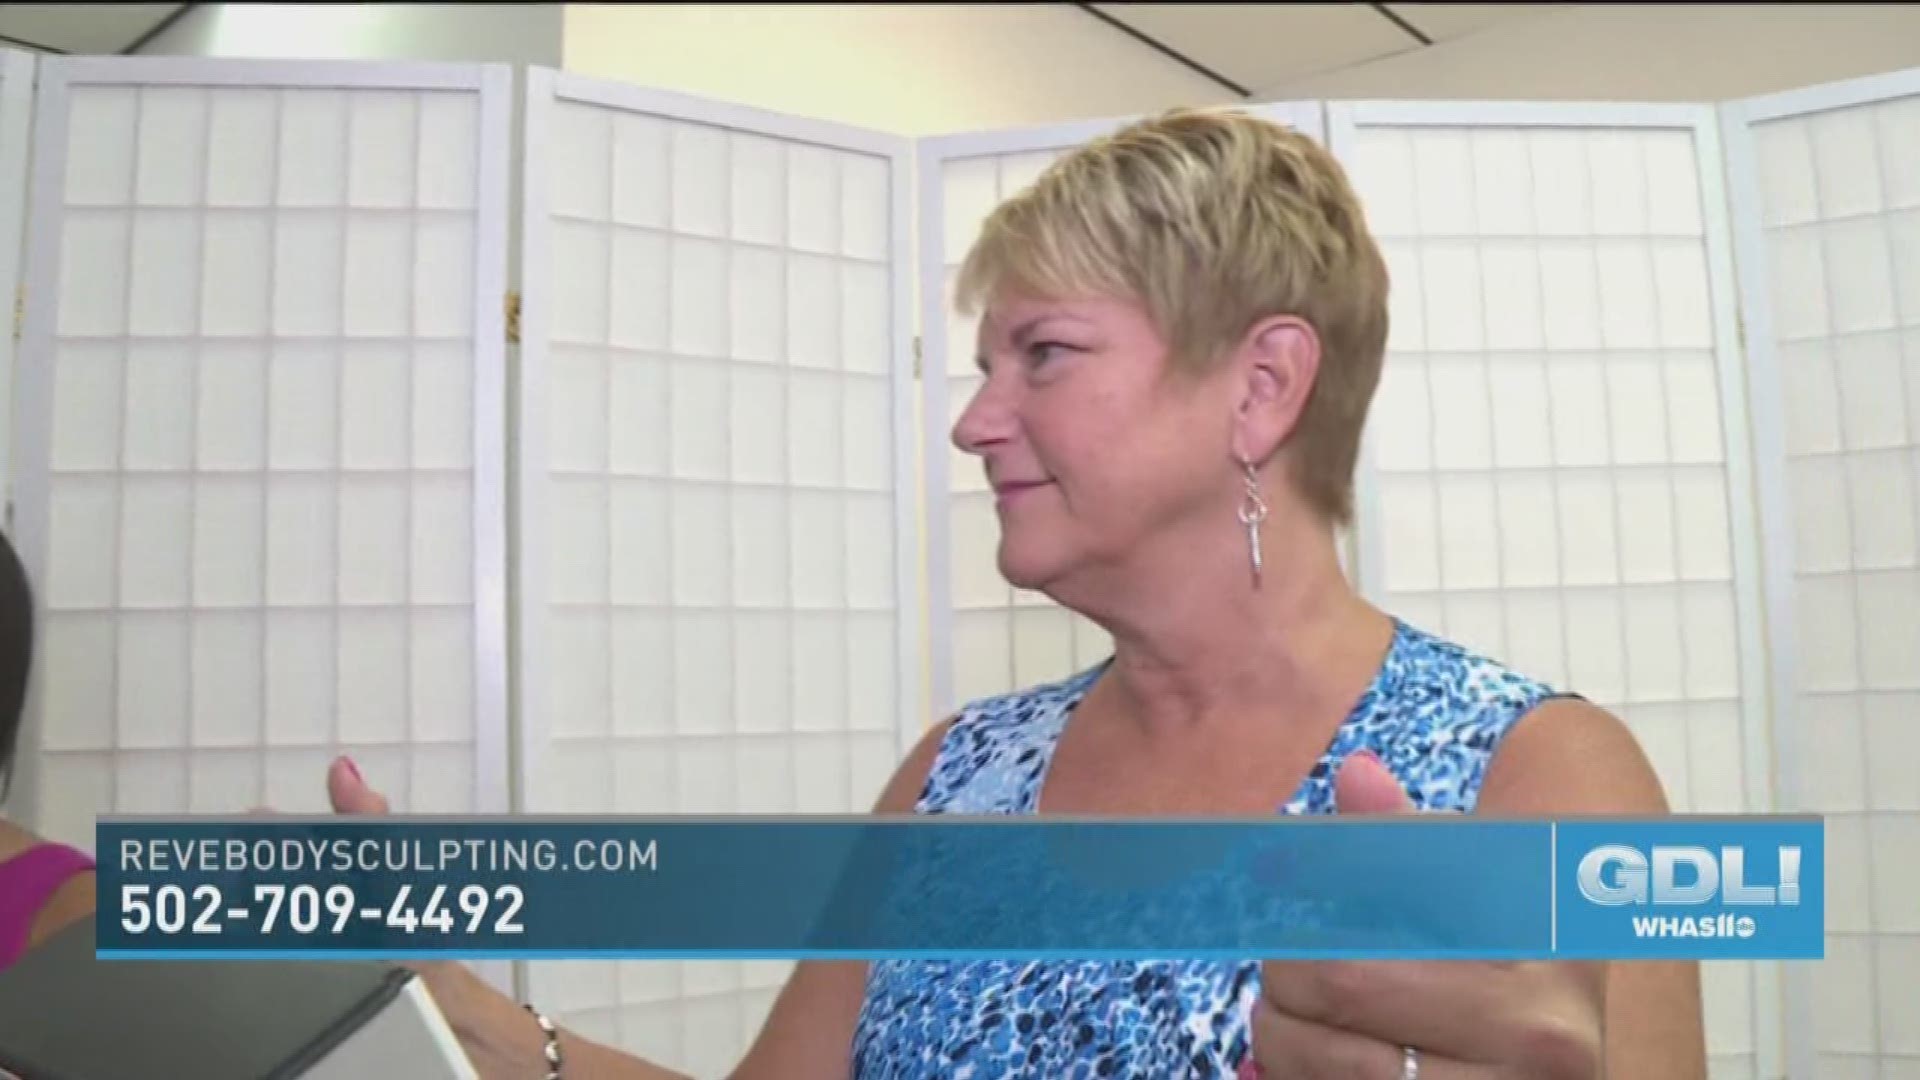 Great Day Live's Angie Fenton stopped by Reve body sculpting to find out more. Contact Reve Body Sculpting at 502-709-4492, online at www.ReveBodySculpting.com or visit their Louisville location at 12238 Shelbyville Road, Louisville, KY.